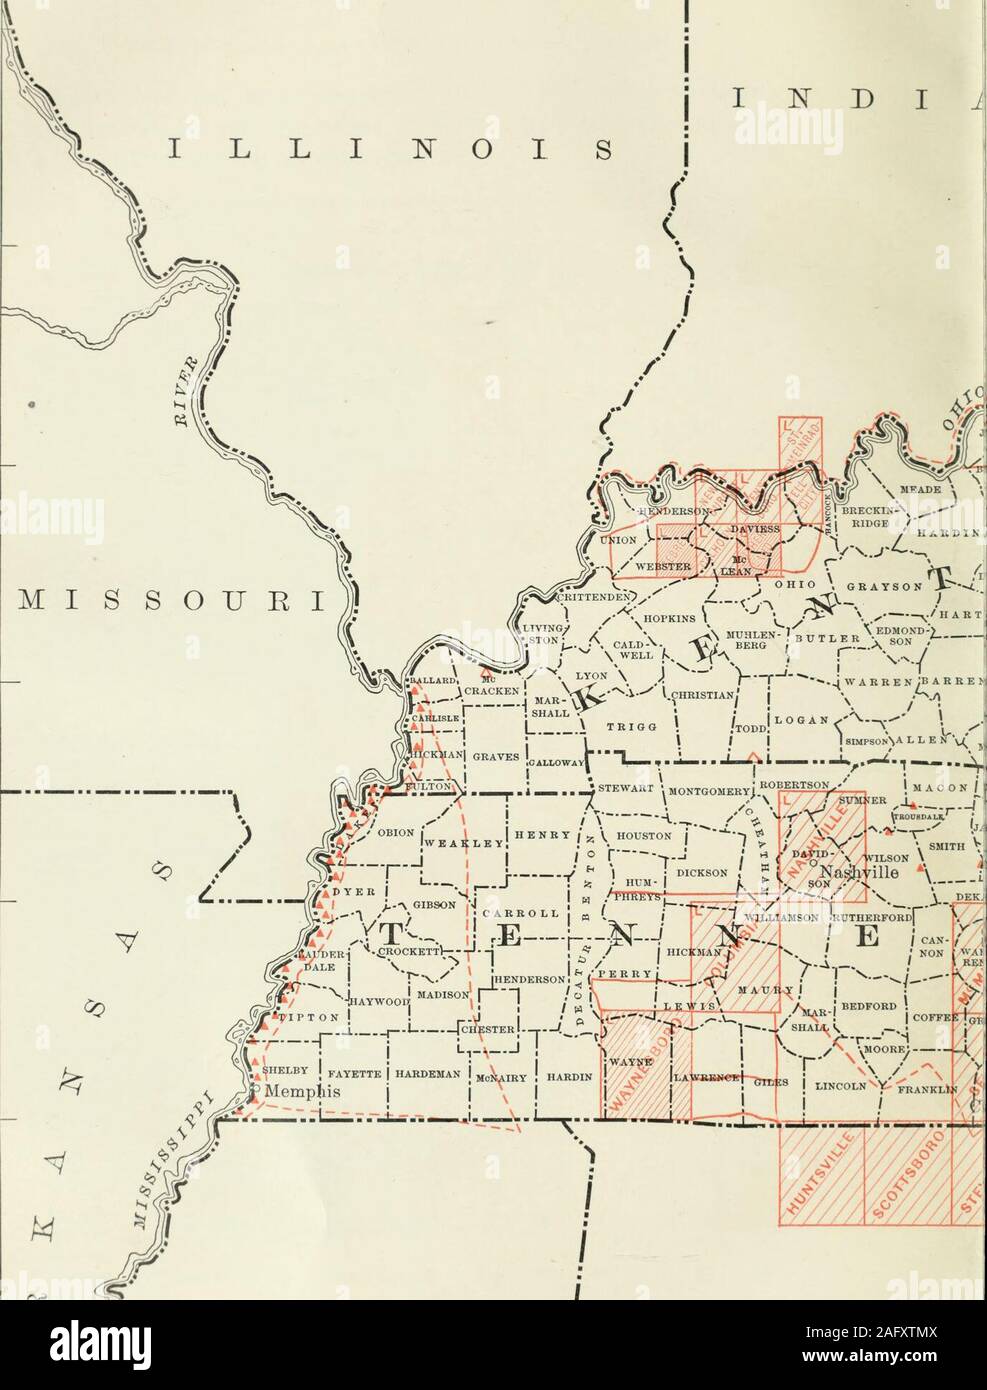 . Annual Reports of the Department of the Interior 1905. G. S. Smith, incharge; F. GratT,J. R. Eakin, A. P.Meade, O. C. Mer-rill. C. C. Bassett W. O. Tufts .C. C. Bassett Cattaraugus ... | Erie J Orange Goshen Orange Port Jarvis .. Eden i J. H. Jennings Lewis .Oneida Port Lcvden.. W. O. Tufts J. H. Jennings, incharge; W. O.Tufts, J. A. Close. fG. S. Smith, in I charge; .1. M. Whitman, G.[ Young. Area,mapped. Sqjniles.221 I 219 100219 223210 217217 209217206 158 36 46 136 Trigono-metricloca-tions. 2,634 Madison..Oneida ...Hamilton U..tur,.riir.lrl P ^^- -Jennings, in 1jSangcrlitld.. I charge;G Stock Photo